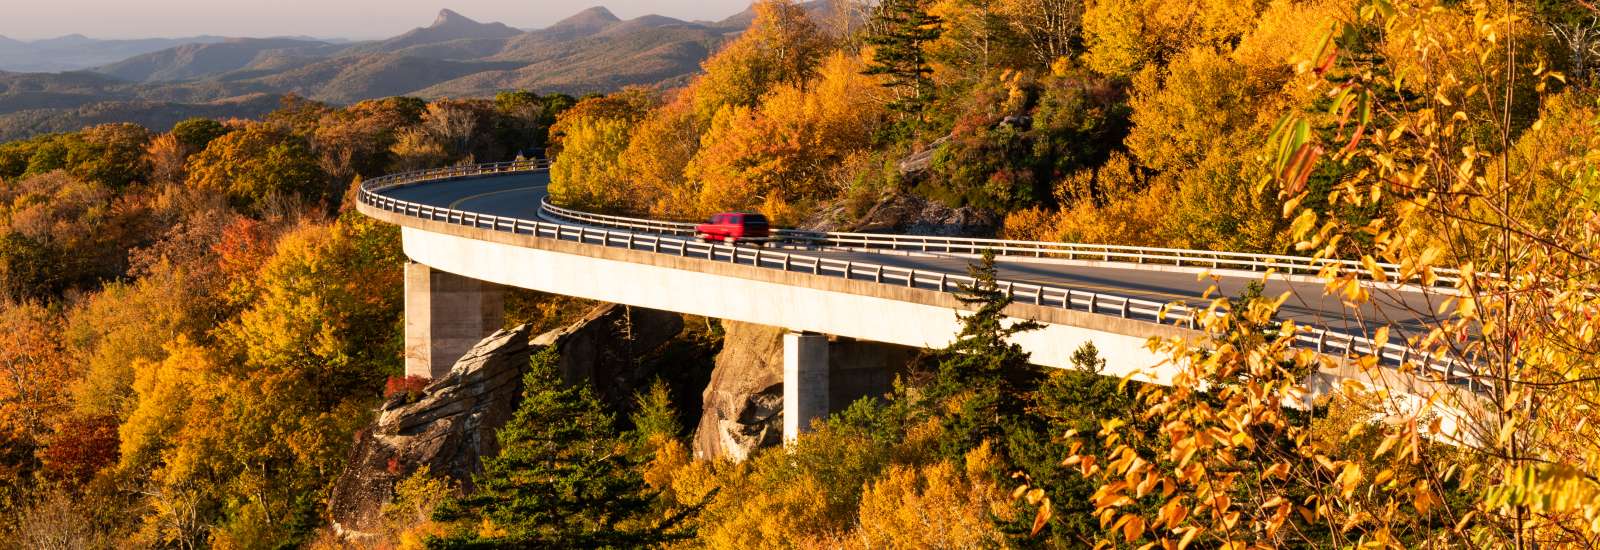 The Linn Cove Viaduct dressed in fall color just after sunrise